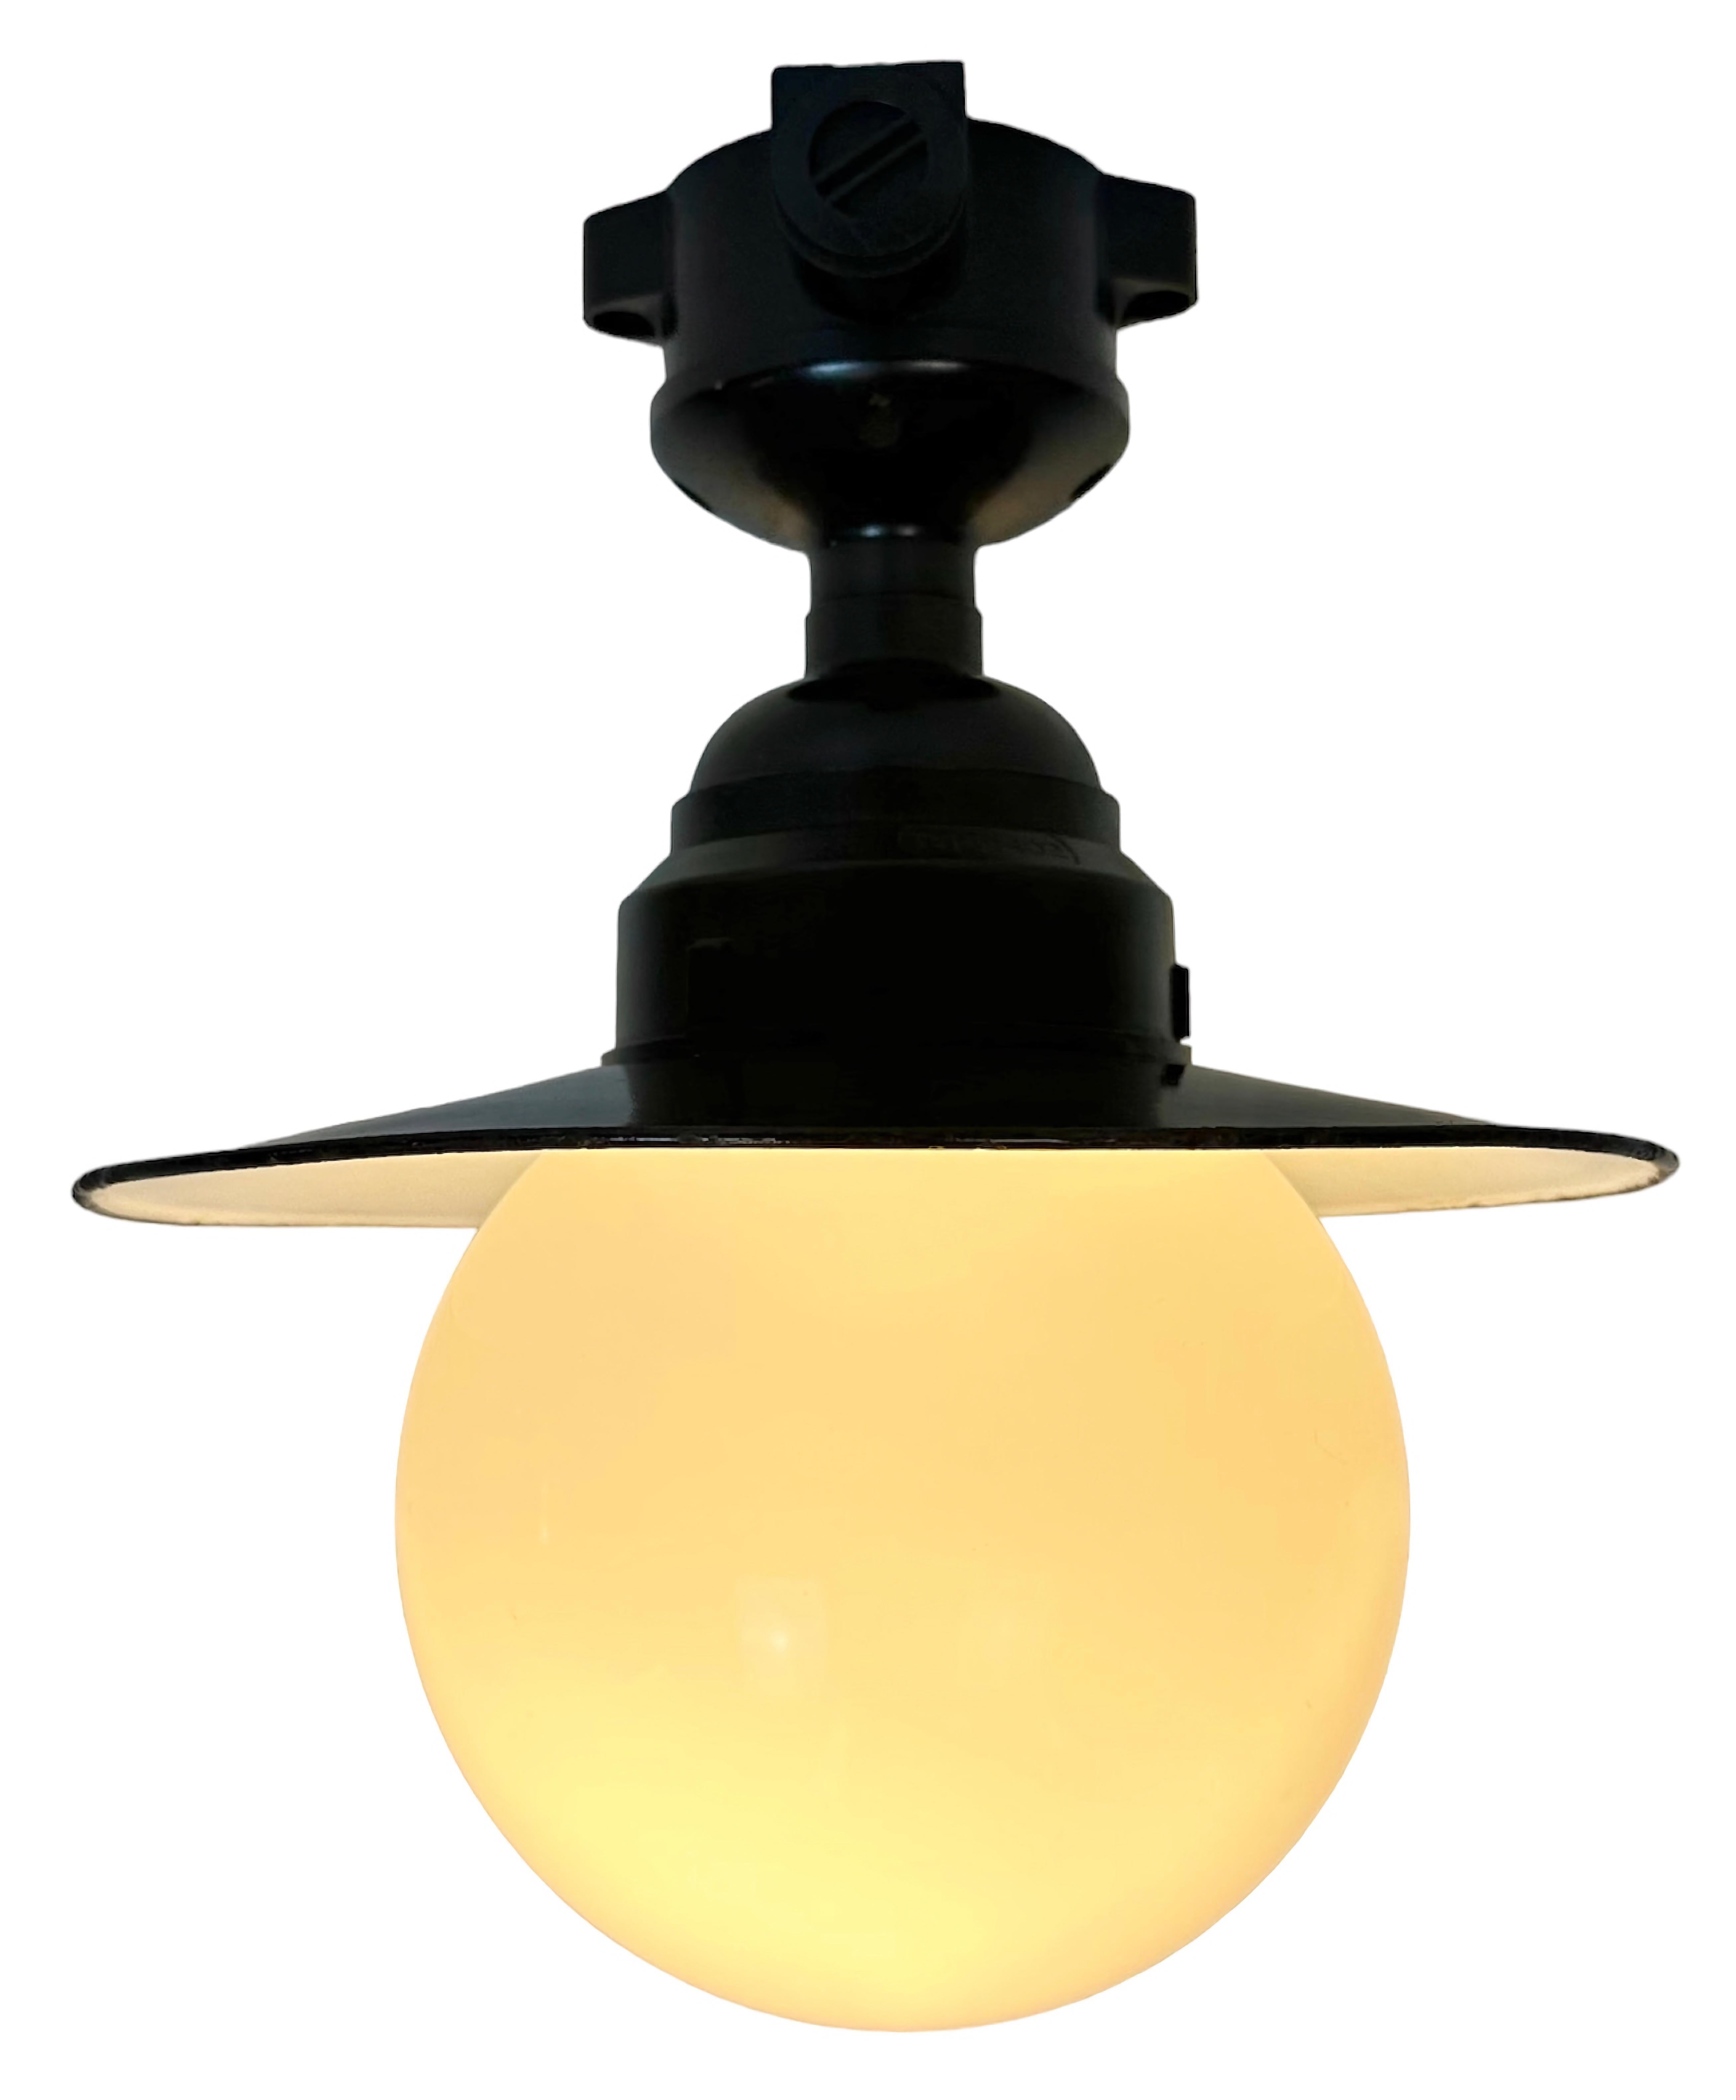 Vintage industrial ceiling light made in former Czechoslovakia during the 1960s. It features a brown bakelite ceiling mounting ,a black enamel shade with white enamel interior and a milk glass cover. The socket requires E27/E 26 light bulbs. New